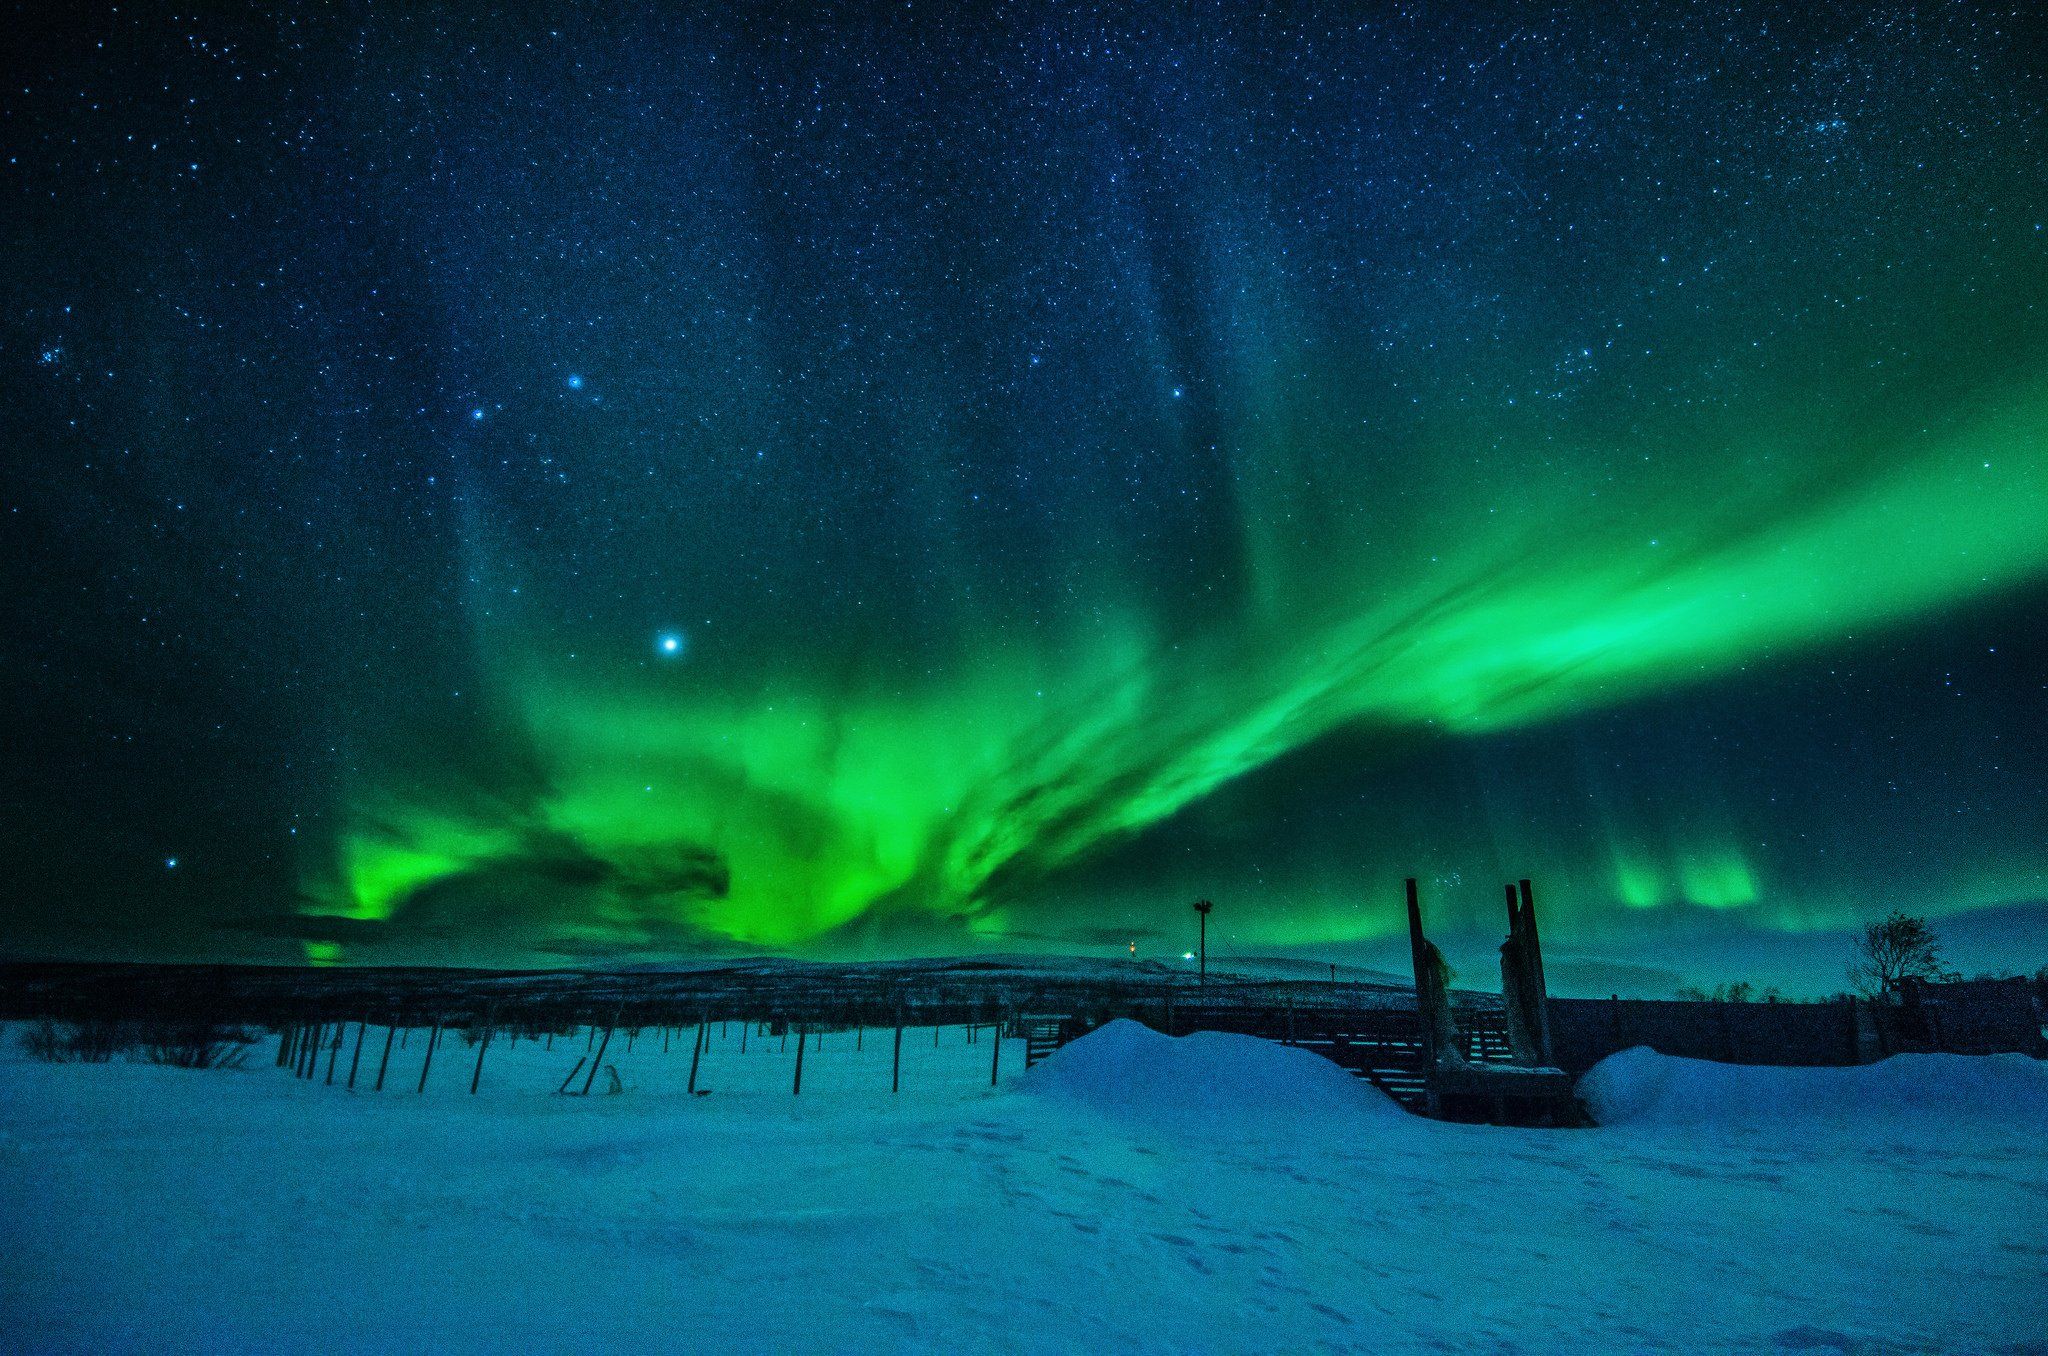 About Northern Lights